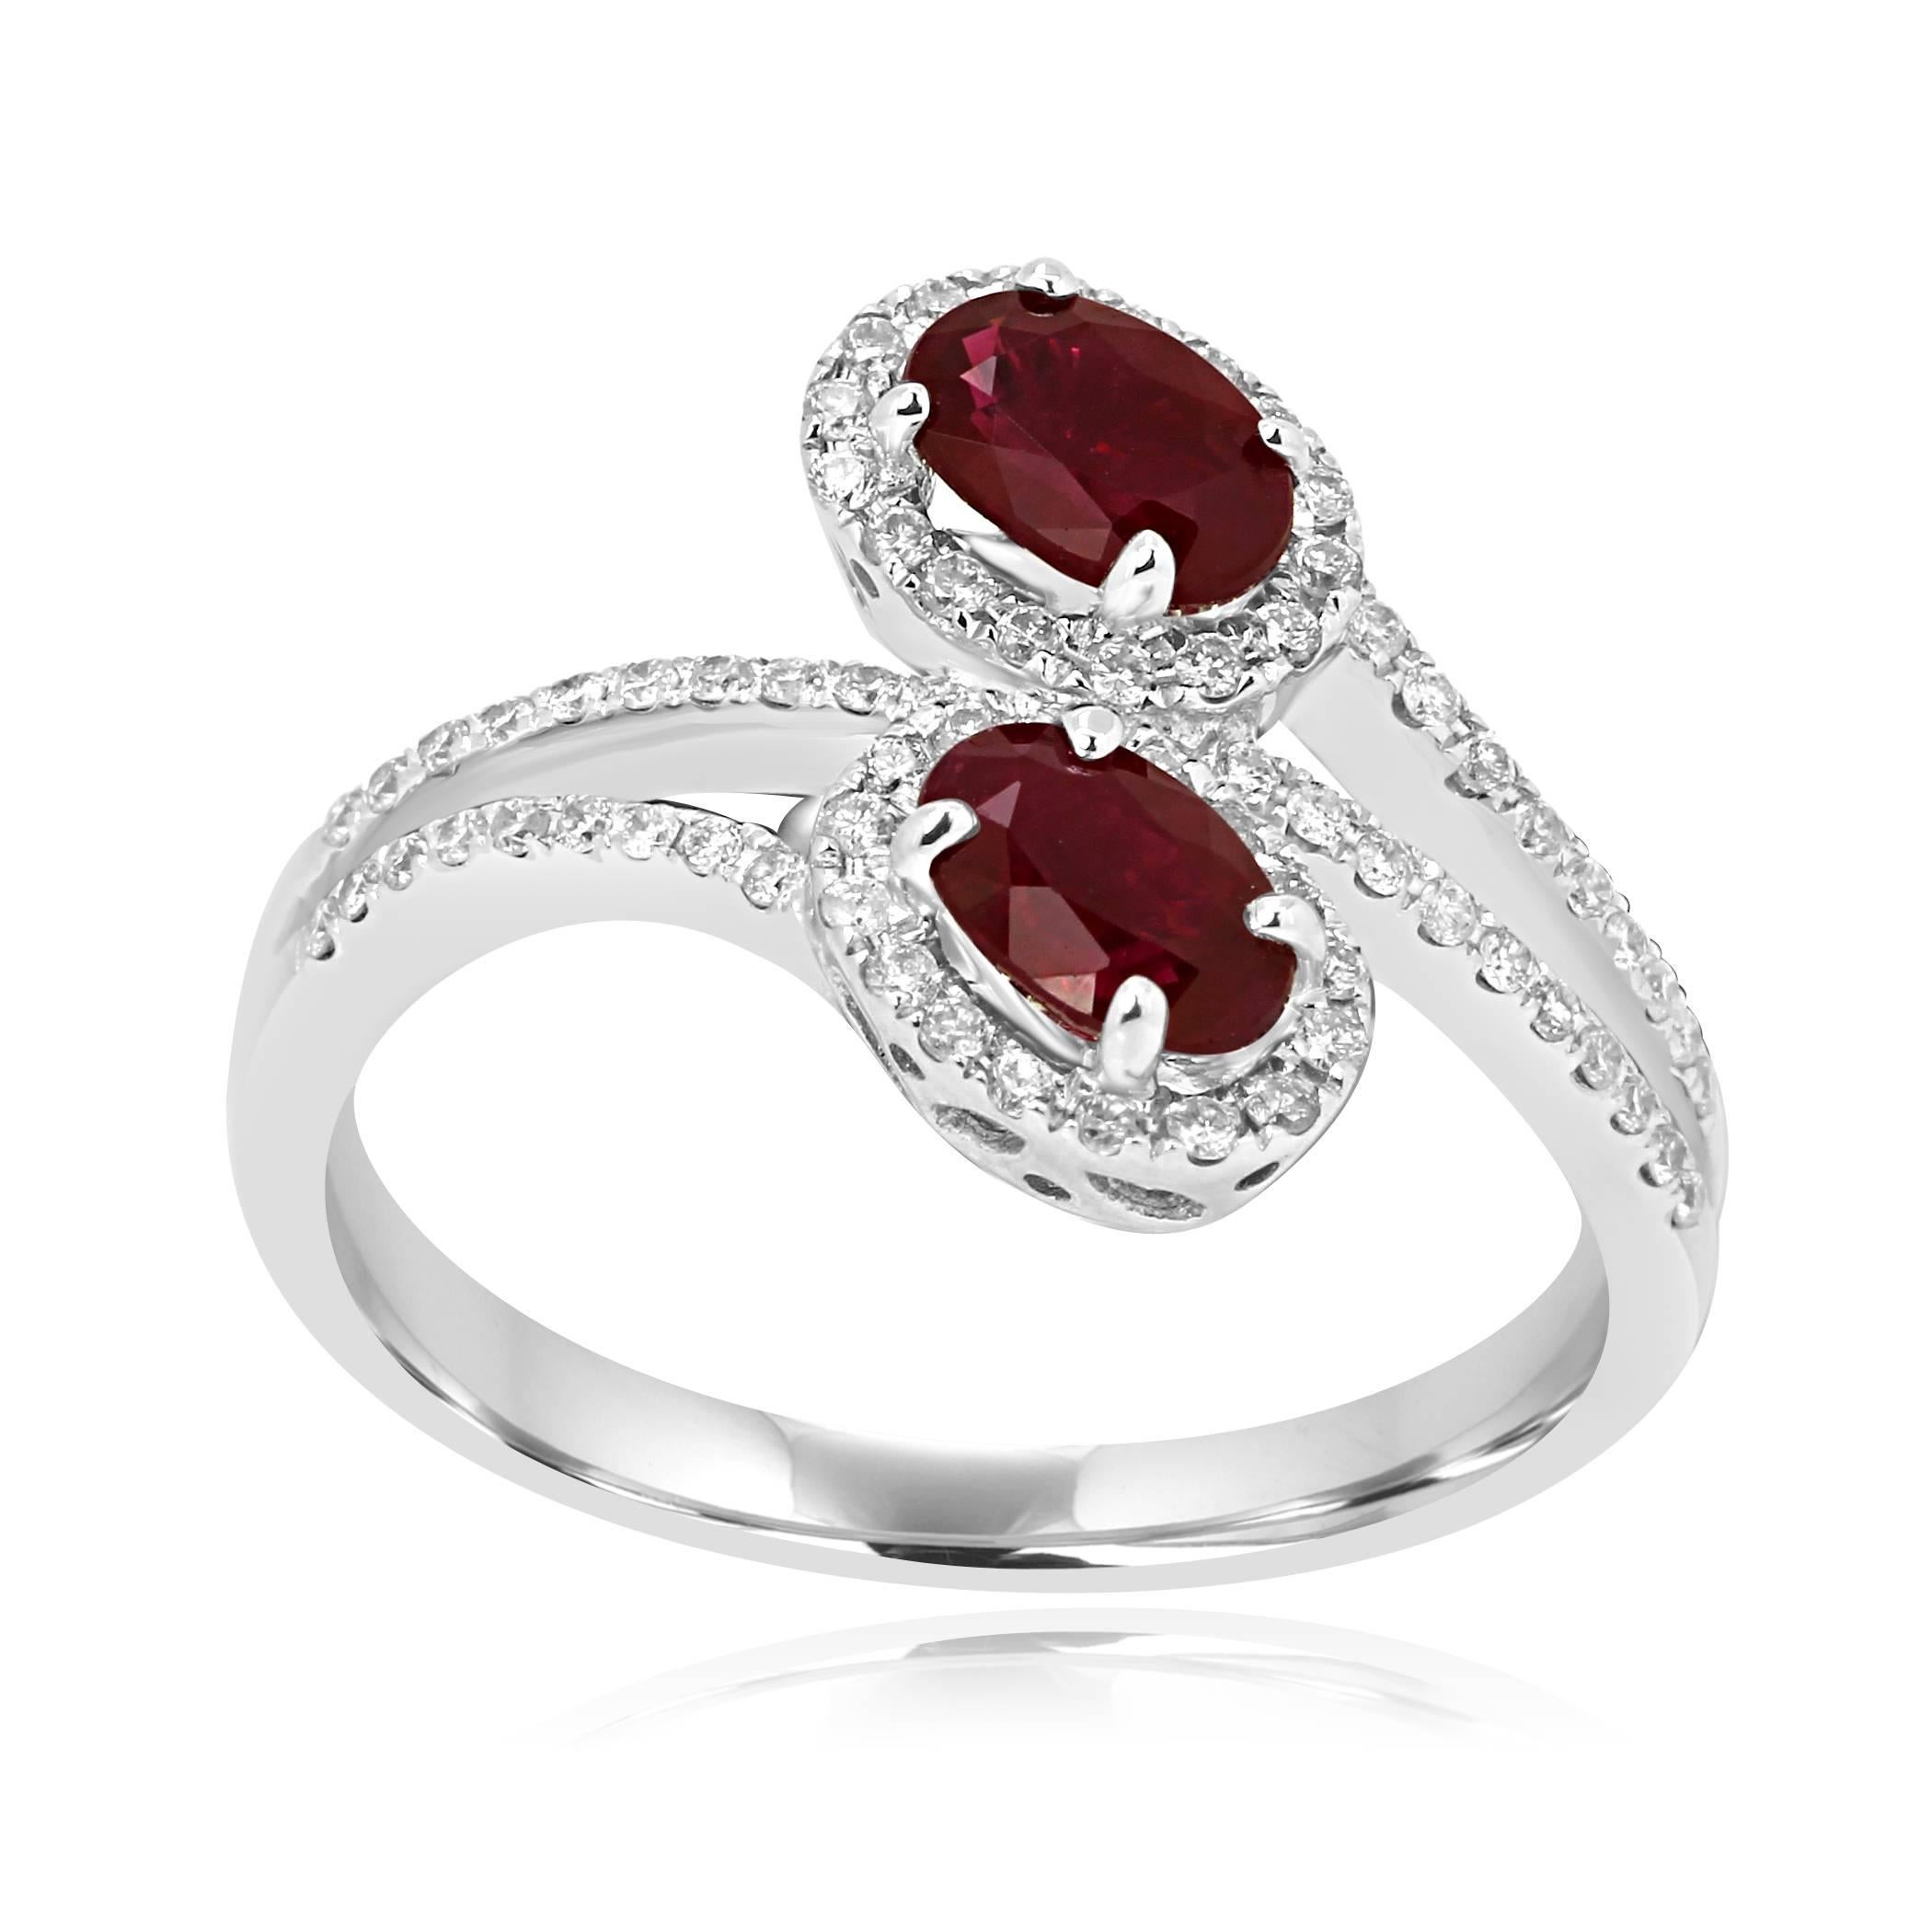 Stunning 2 Ruby Ovals 1.13 Carat encircled in a single Halo of White Near Colorless Diamond 0.27 Carat in 18K White Toi and Moi Fashion Cocktail Gold.

Style available in different price ranges. Prices are based on your selection of 4C's Cut, Color,